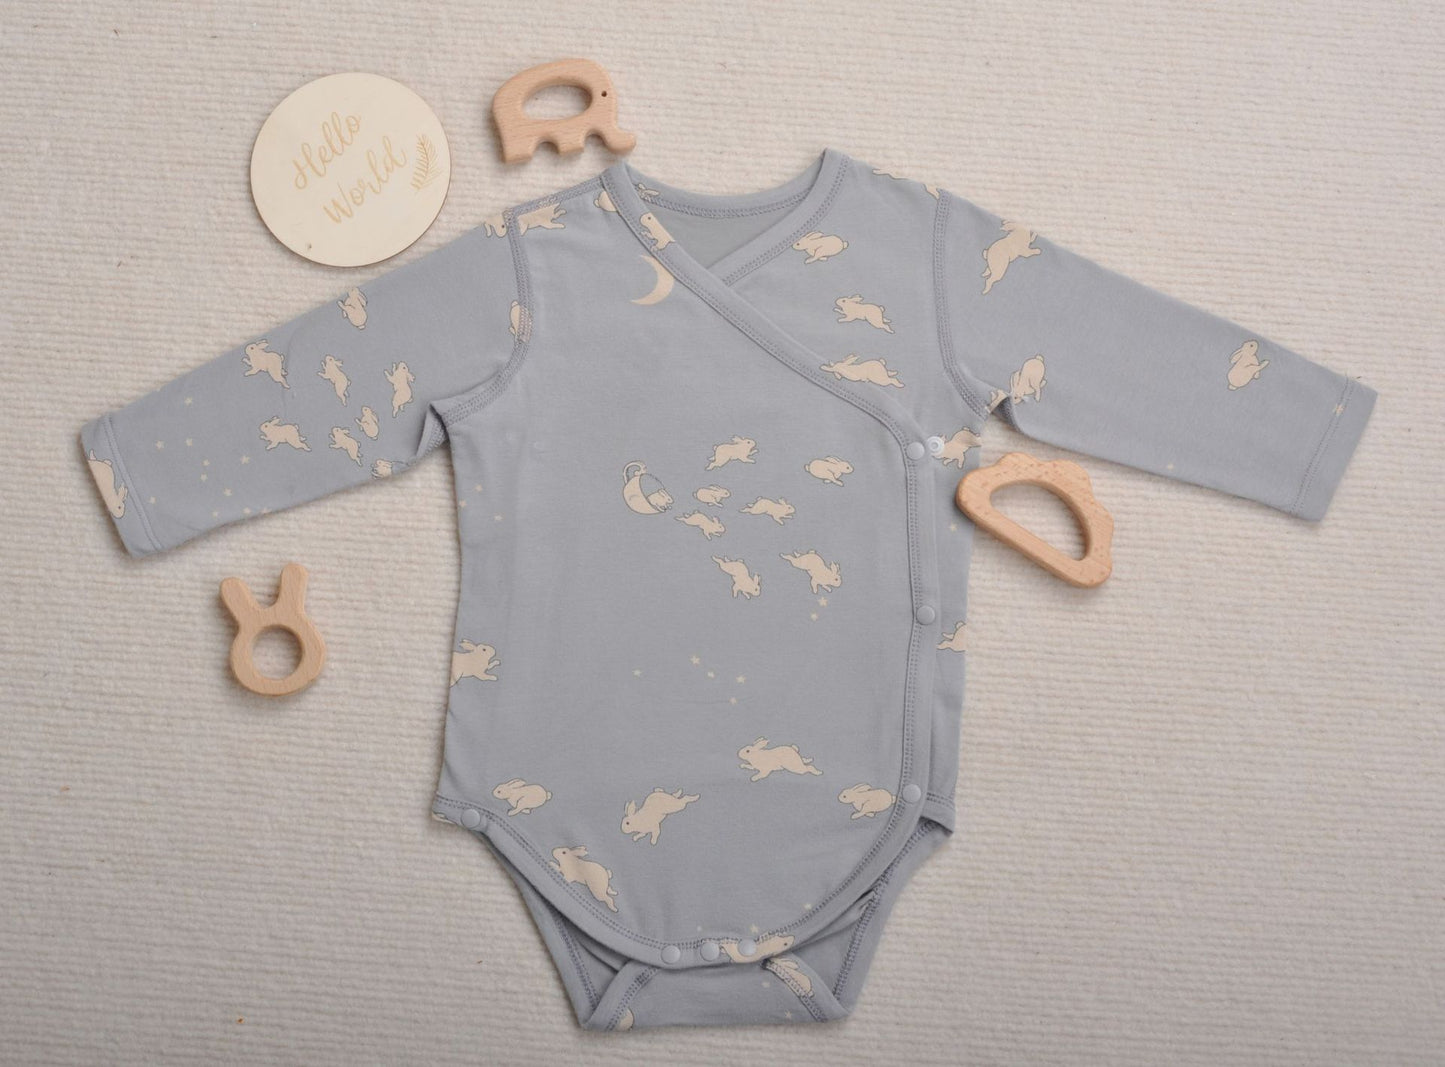 Cotton Baby Onesie (short and long sleeve options)